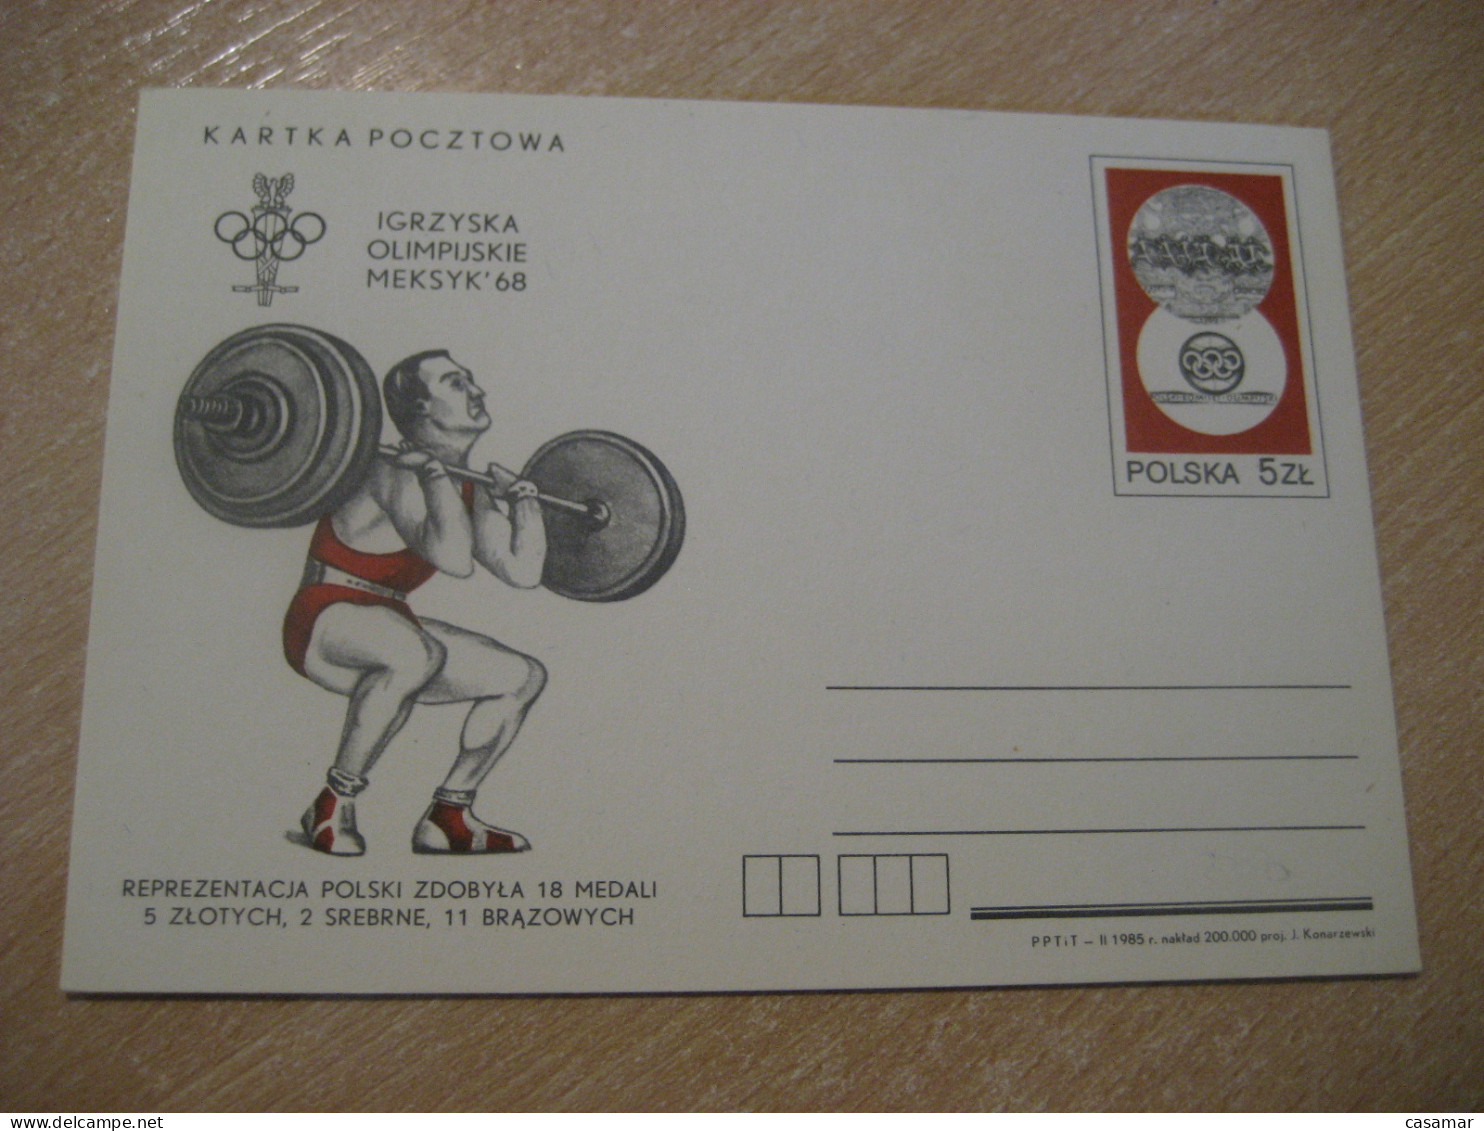 1985 Olympic Games Mexico 1968 Weightlifting Halterophilie Cancel Postal Stationery Card POLAND - Weightlifting